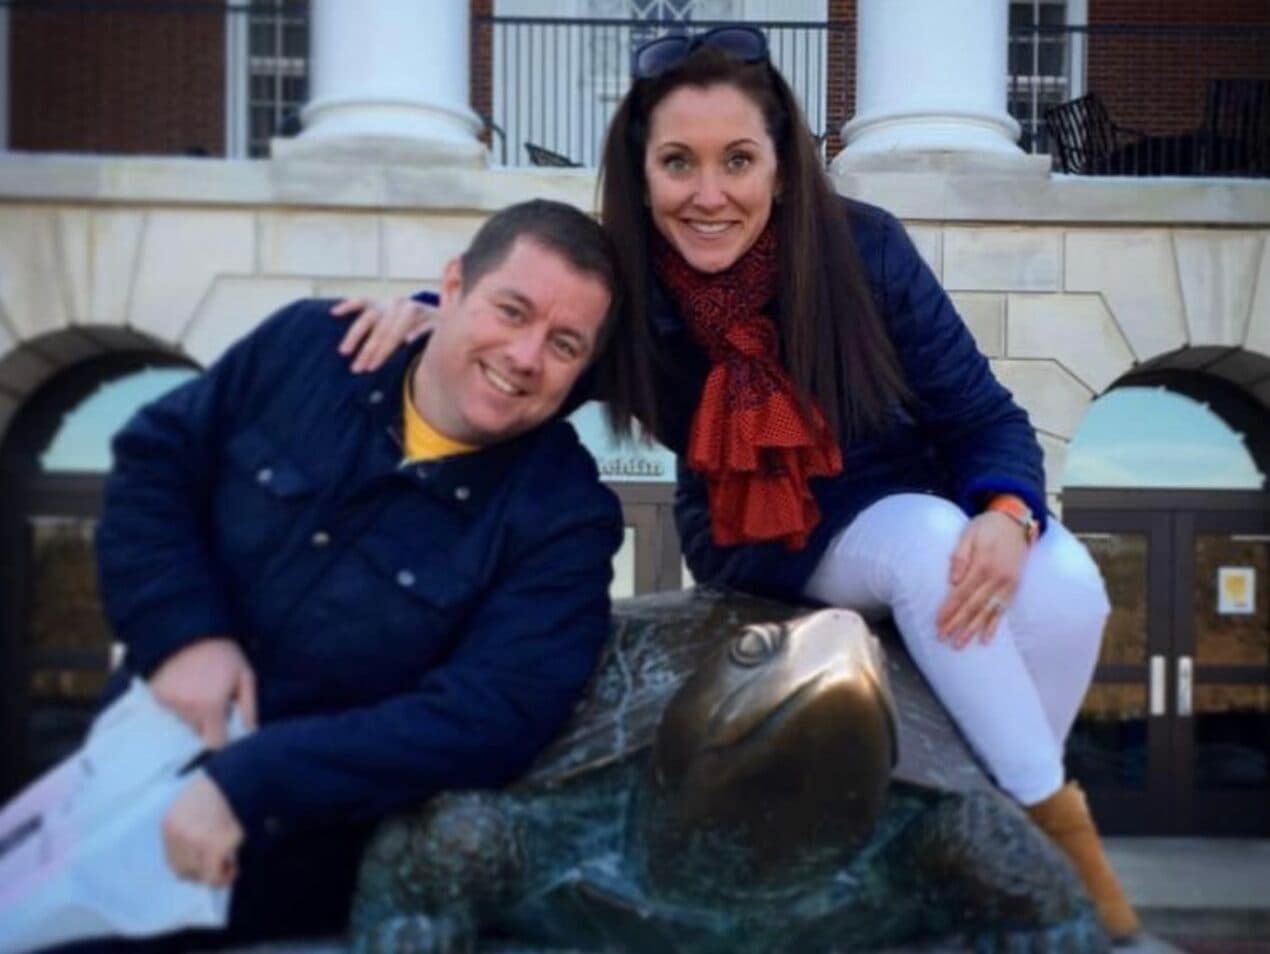 Eric and Nancy posing for a picture with one of UMD's Testudo statues